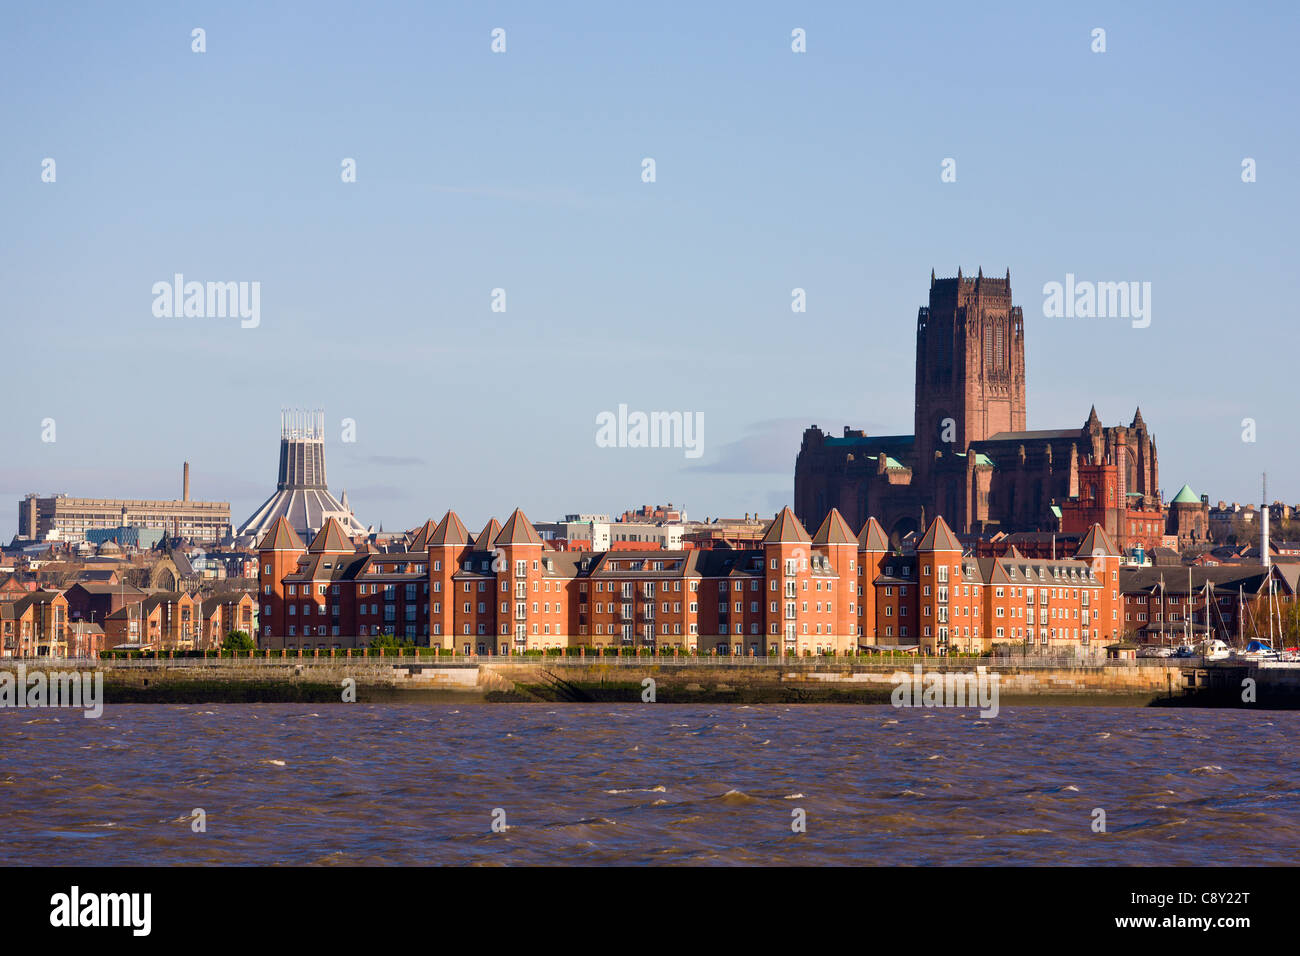 Waterfront Apartment buildings with Catholic and Anglican Cathedrals, Liverpool, Merseyside, England Stock Photo